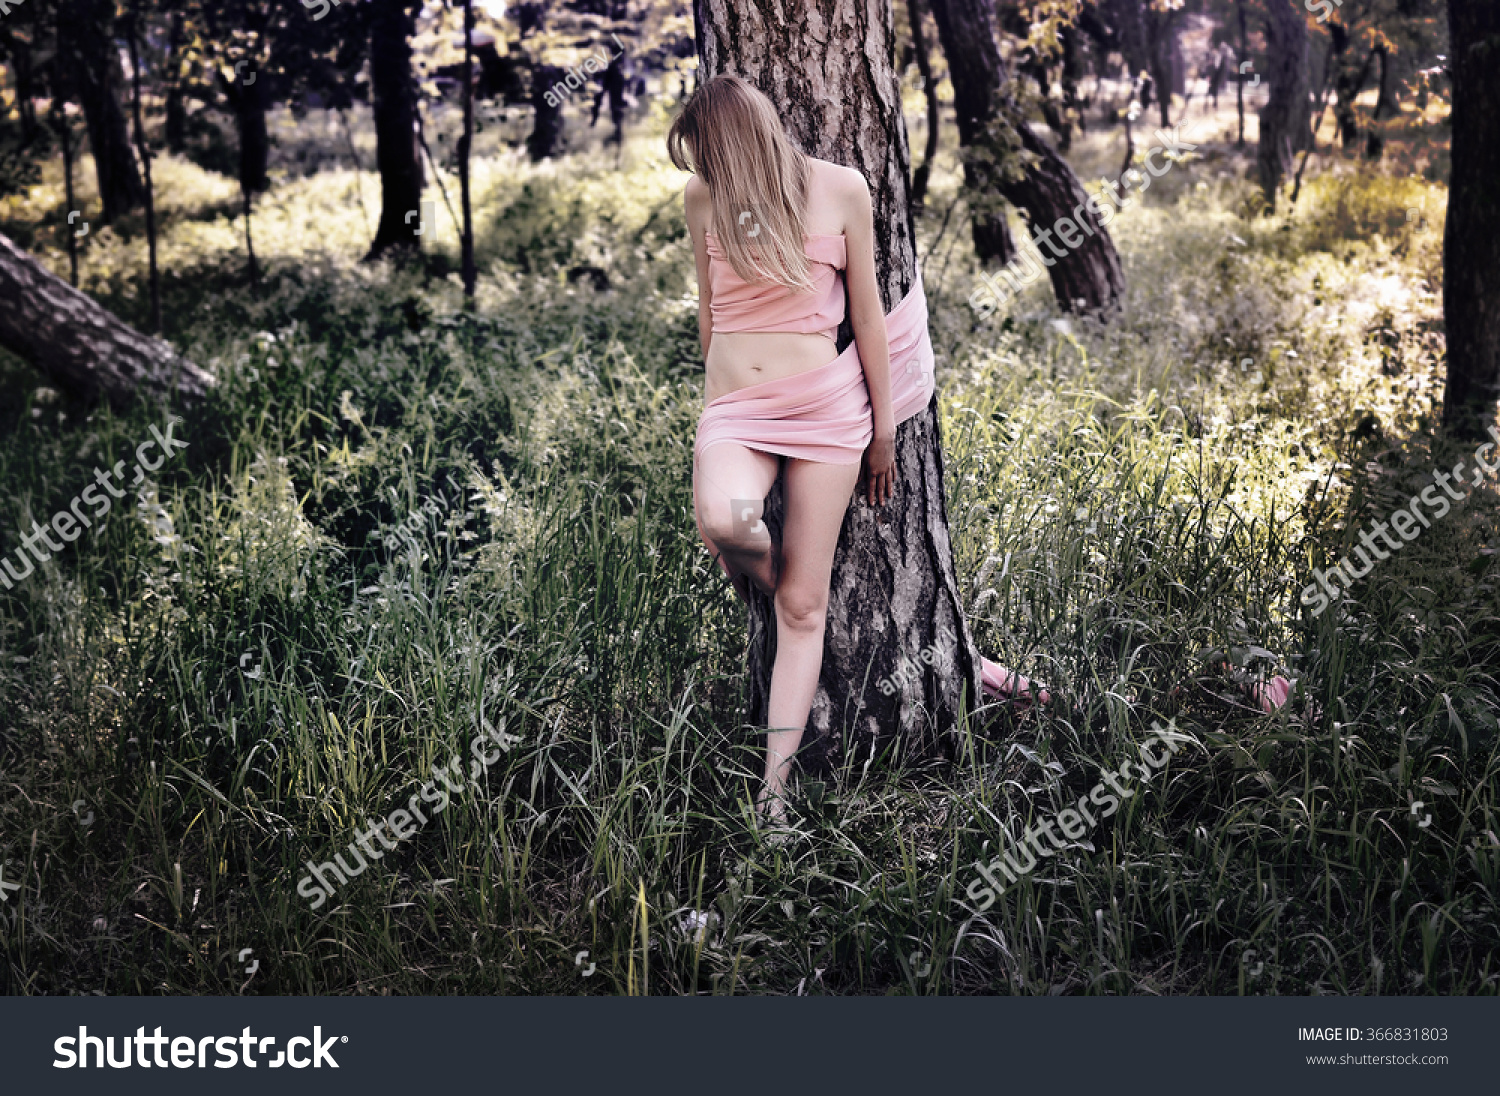 Lost Forest Naked Woman Tied Ribbon Stock Photo 366831803 Shutterstock